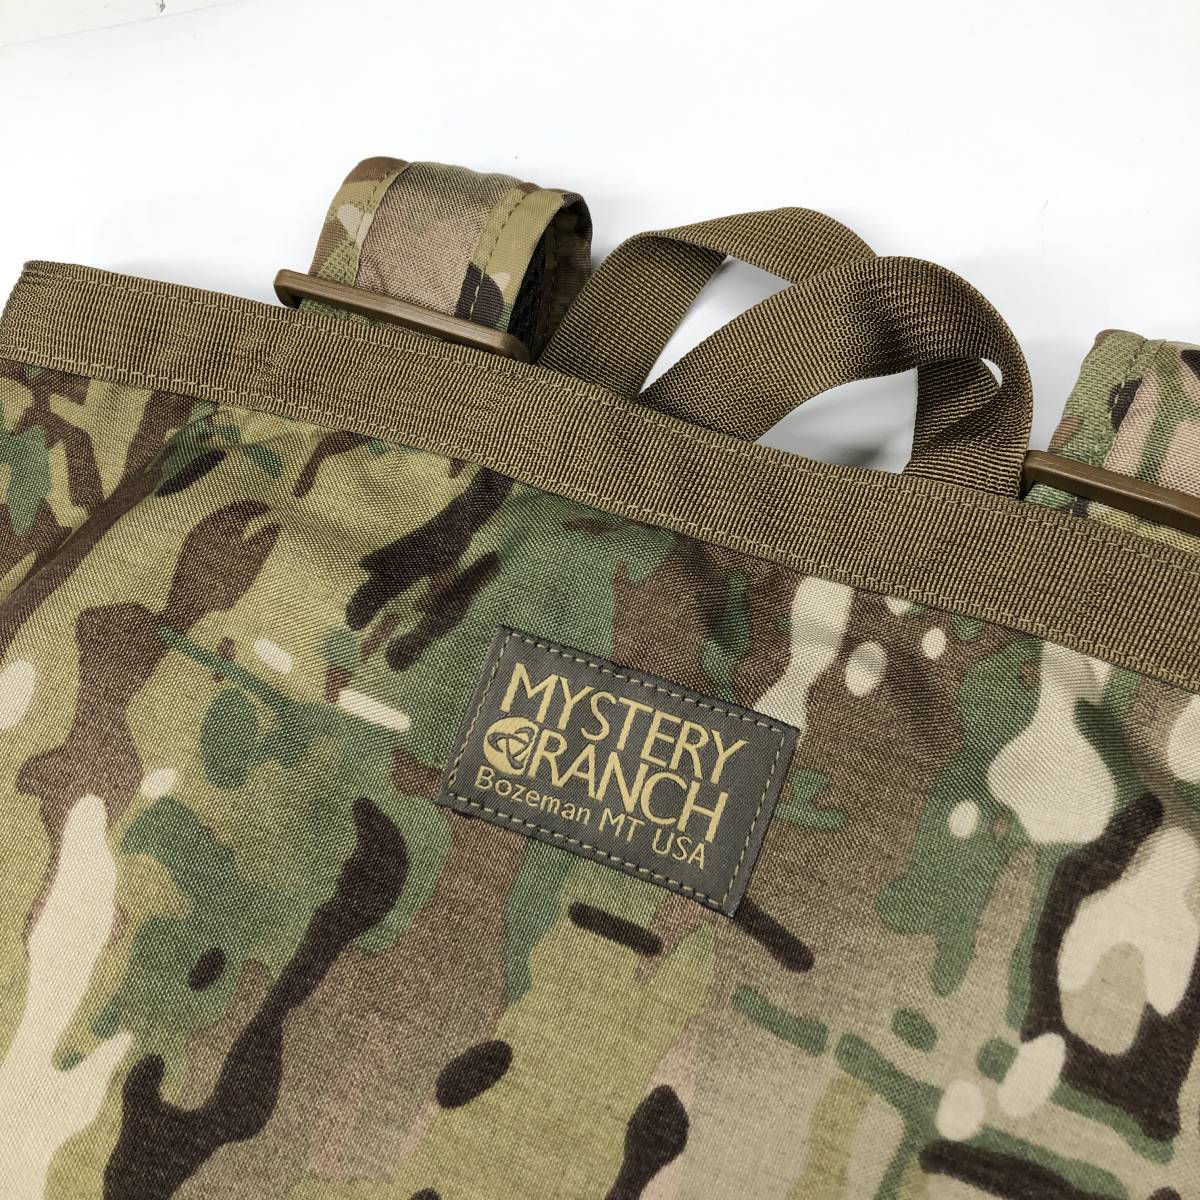 USA made Mystery Ranch MYSTERY RANCHb- tea bag rucksack camouflage multi cam 